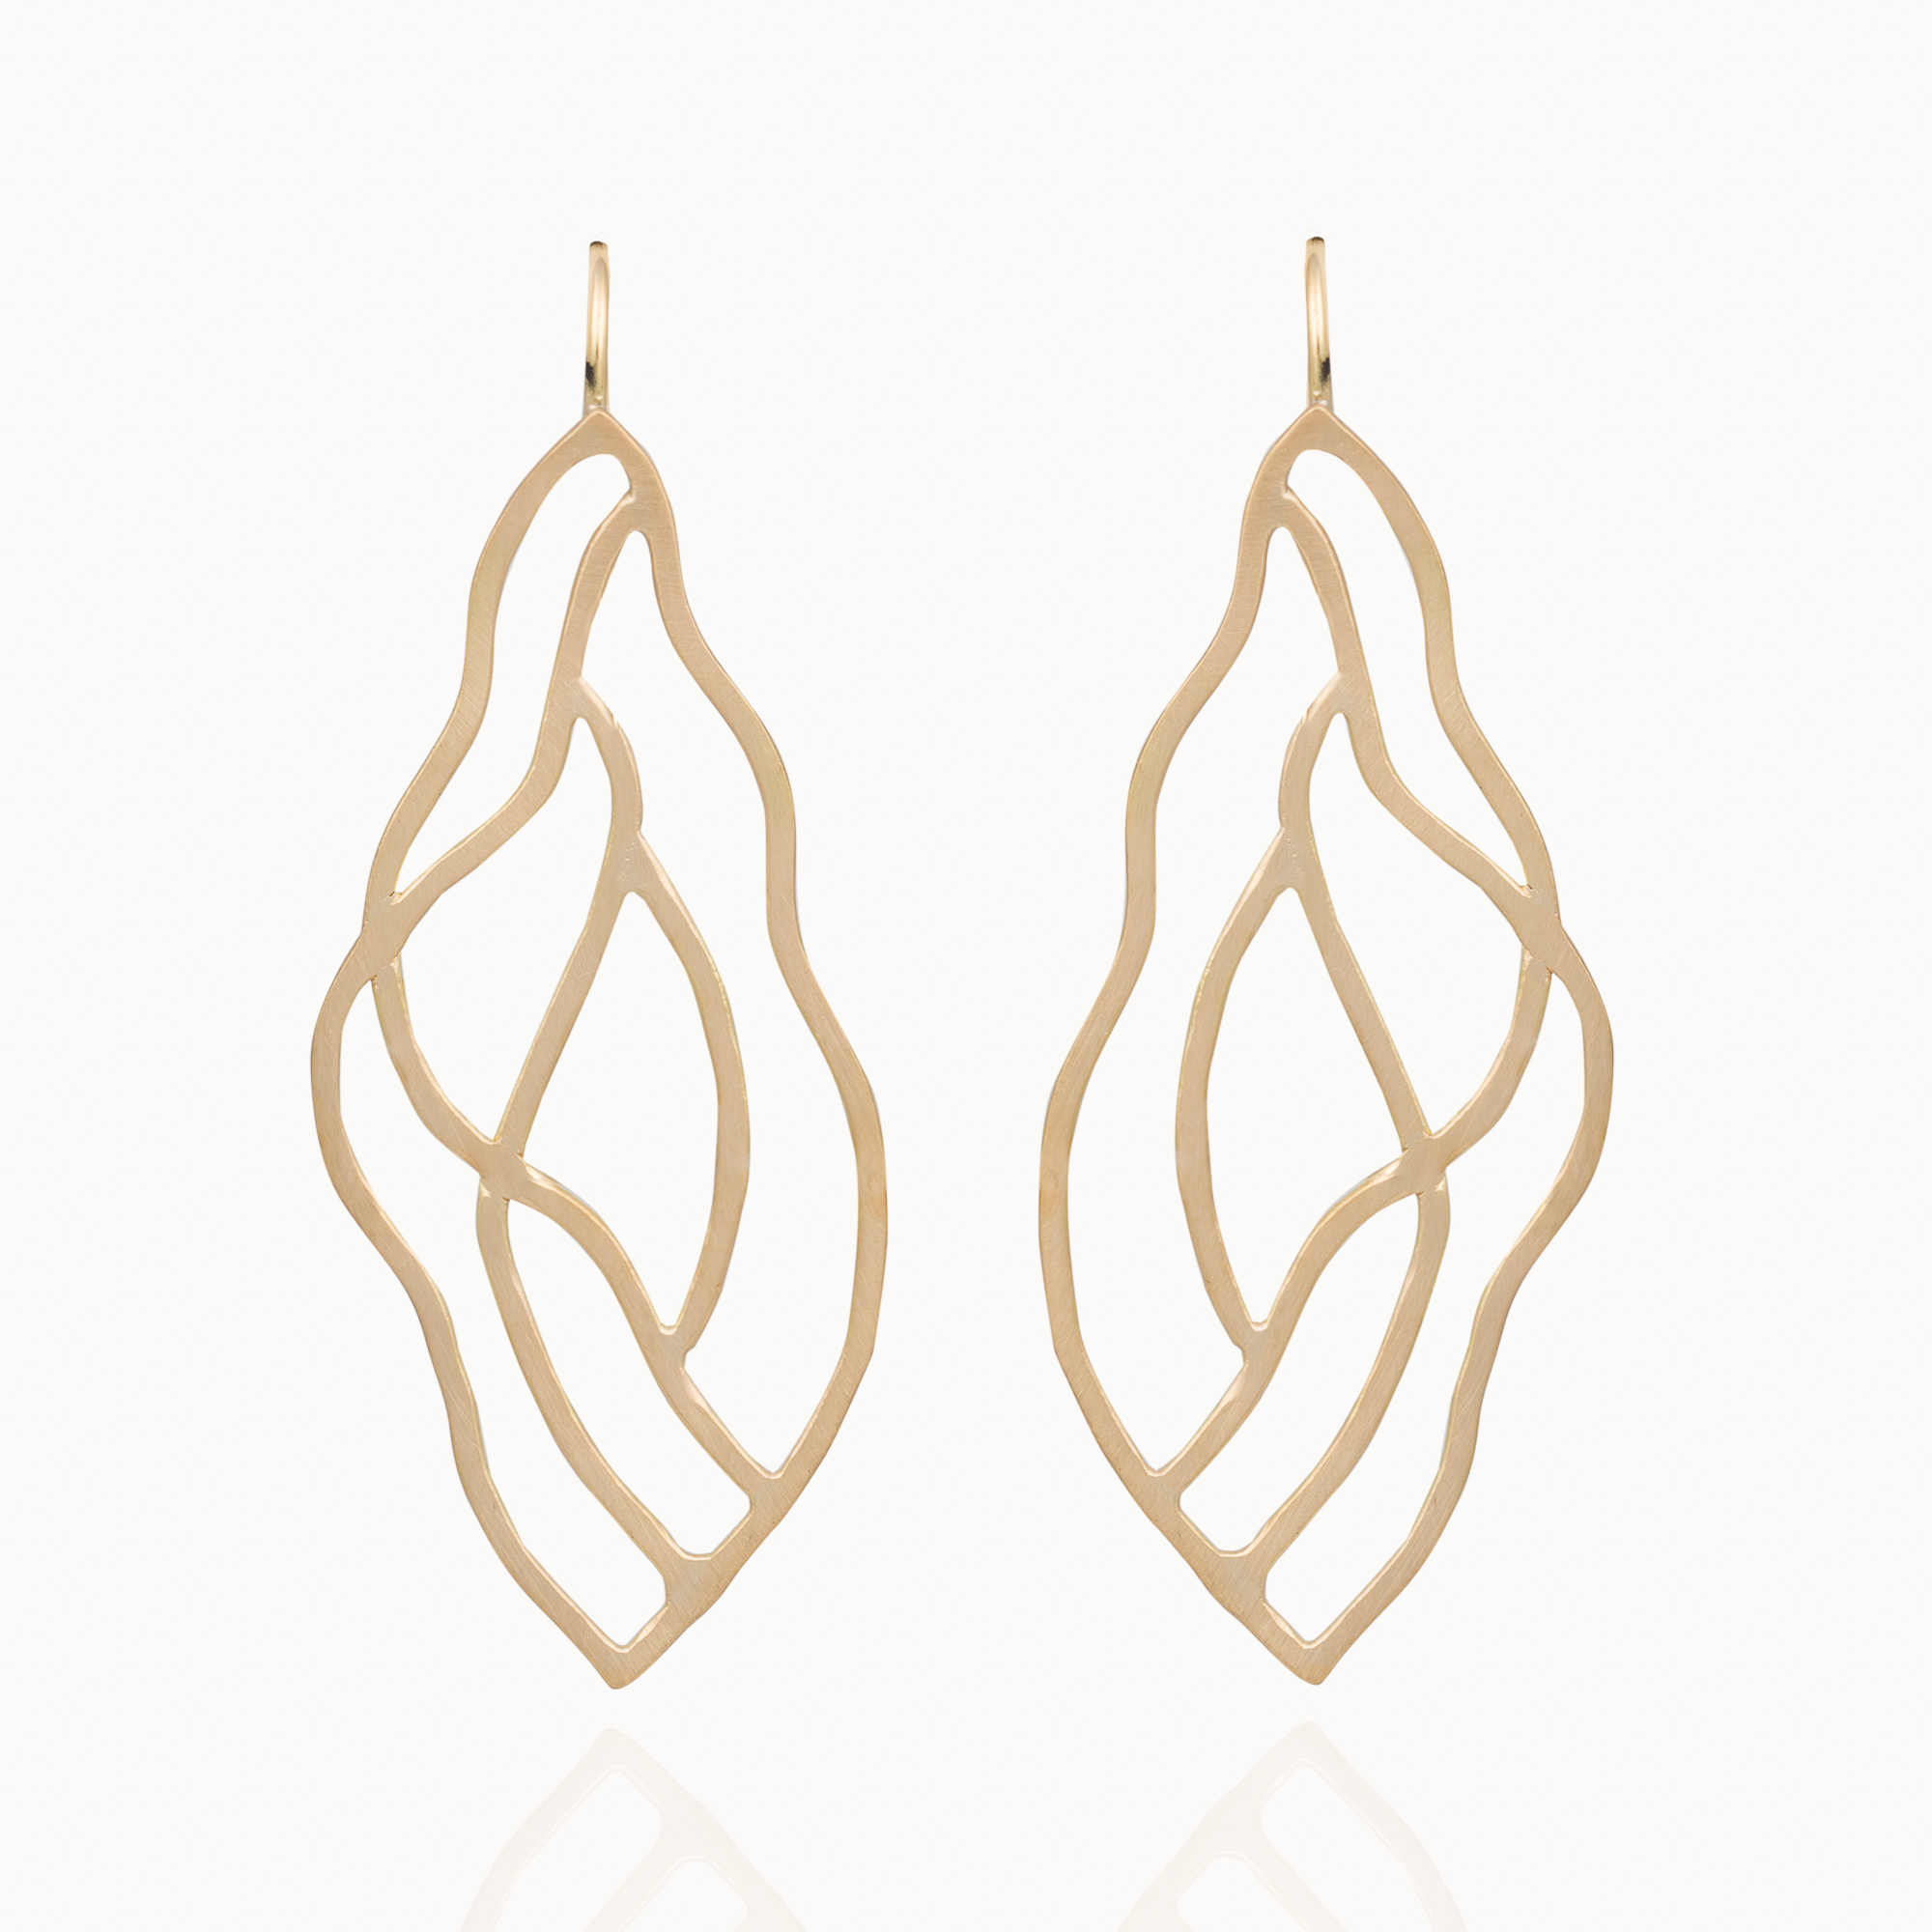 Matte gold earrings made from 18 carat gold.